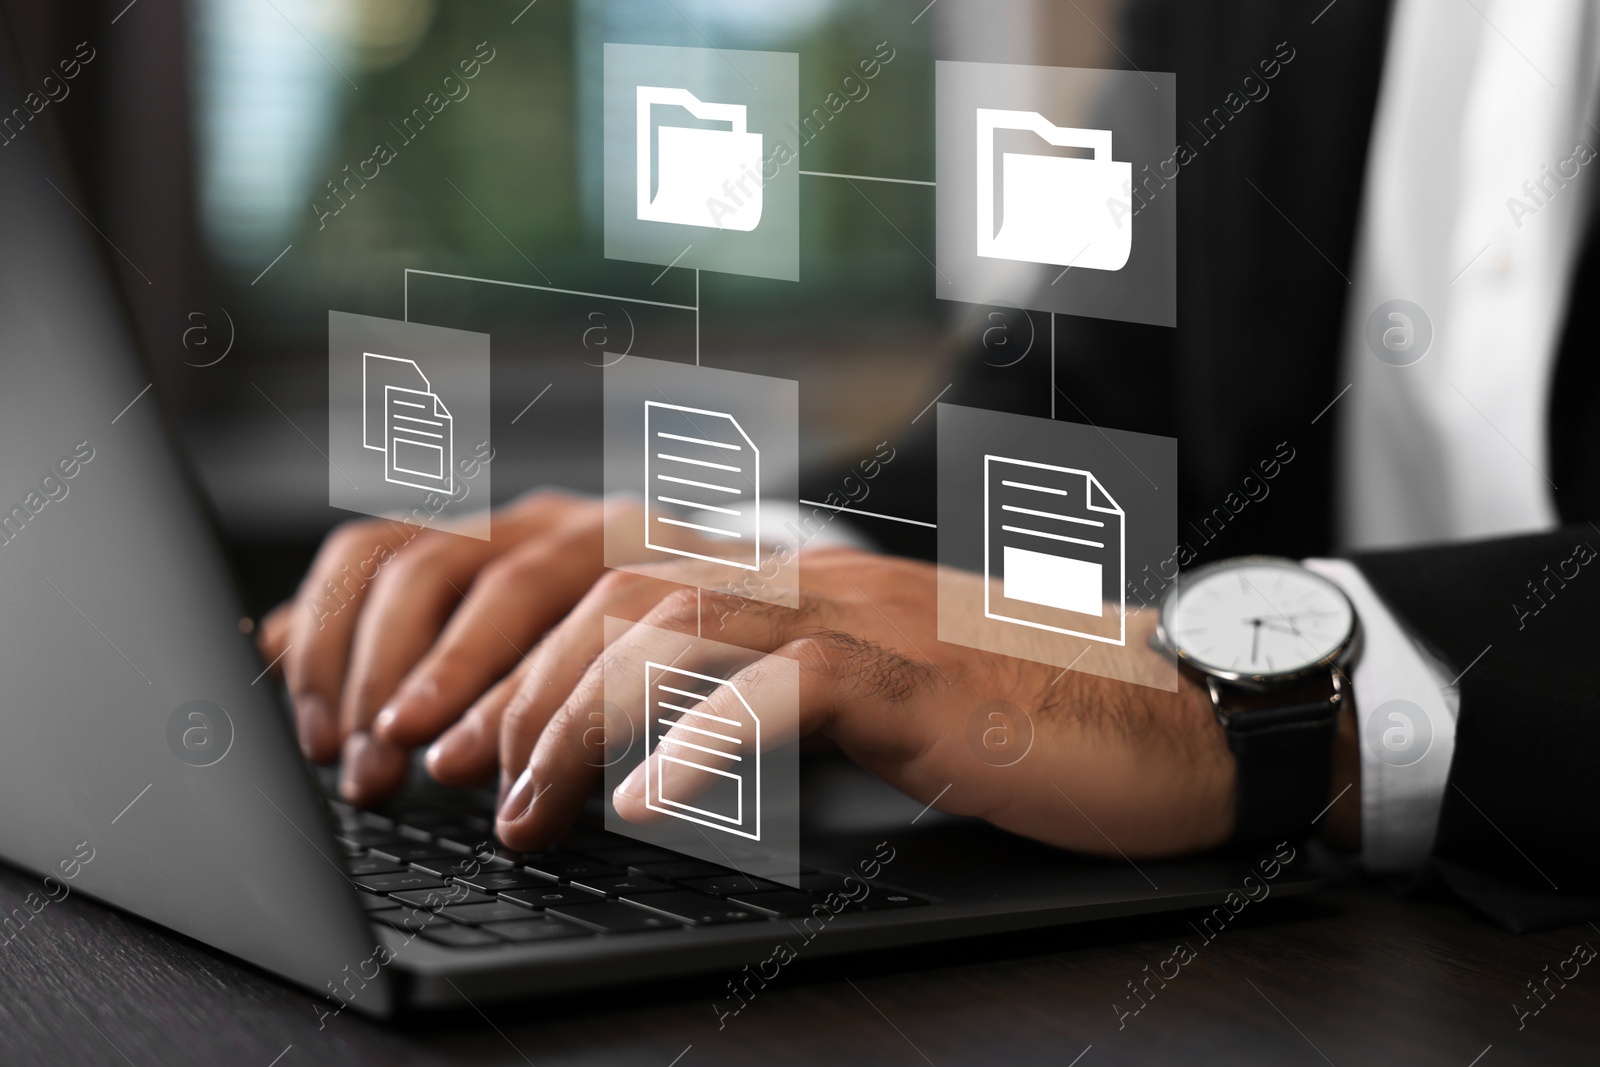 Image of File system. Businessman using laptop at table, closeup. Scheme with folders and documents over computer